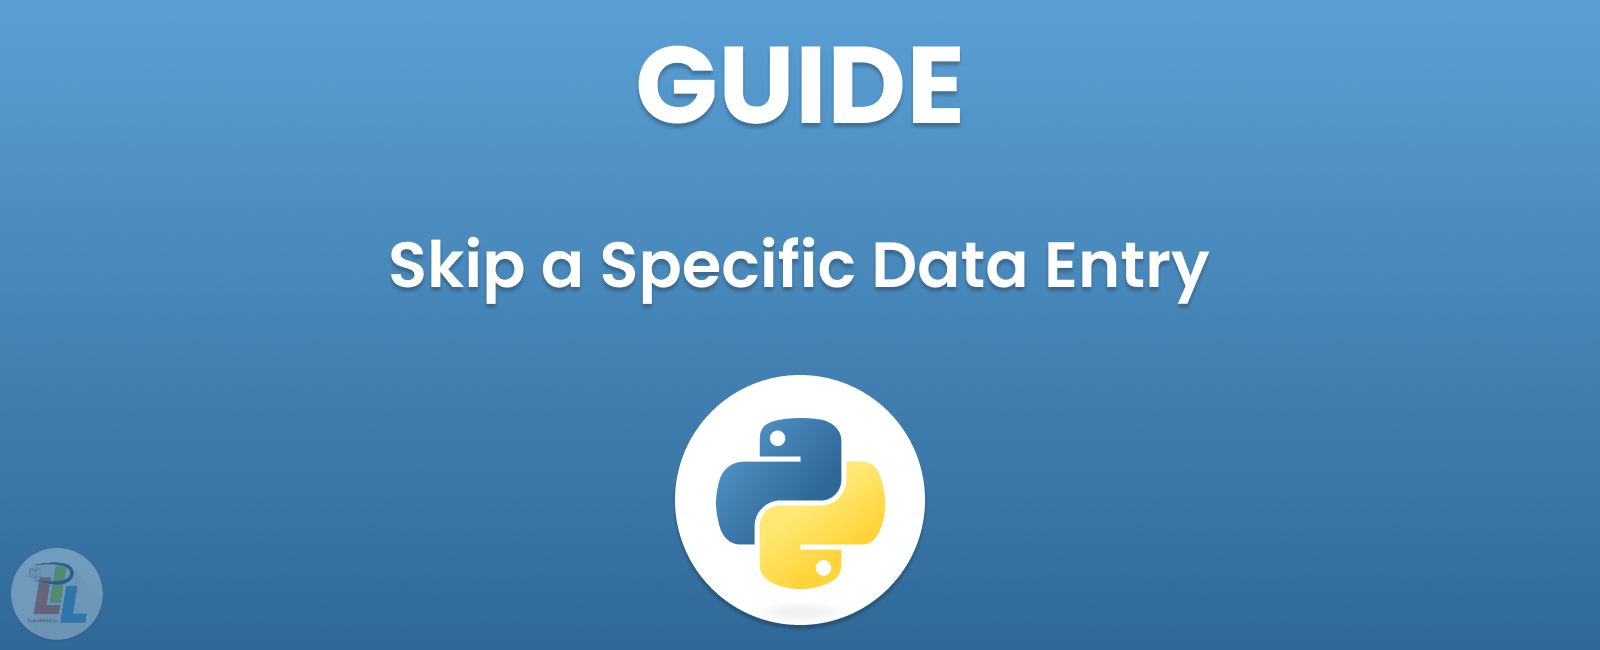 How to Skip a Specific Data Entry in Python